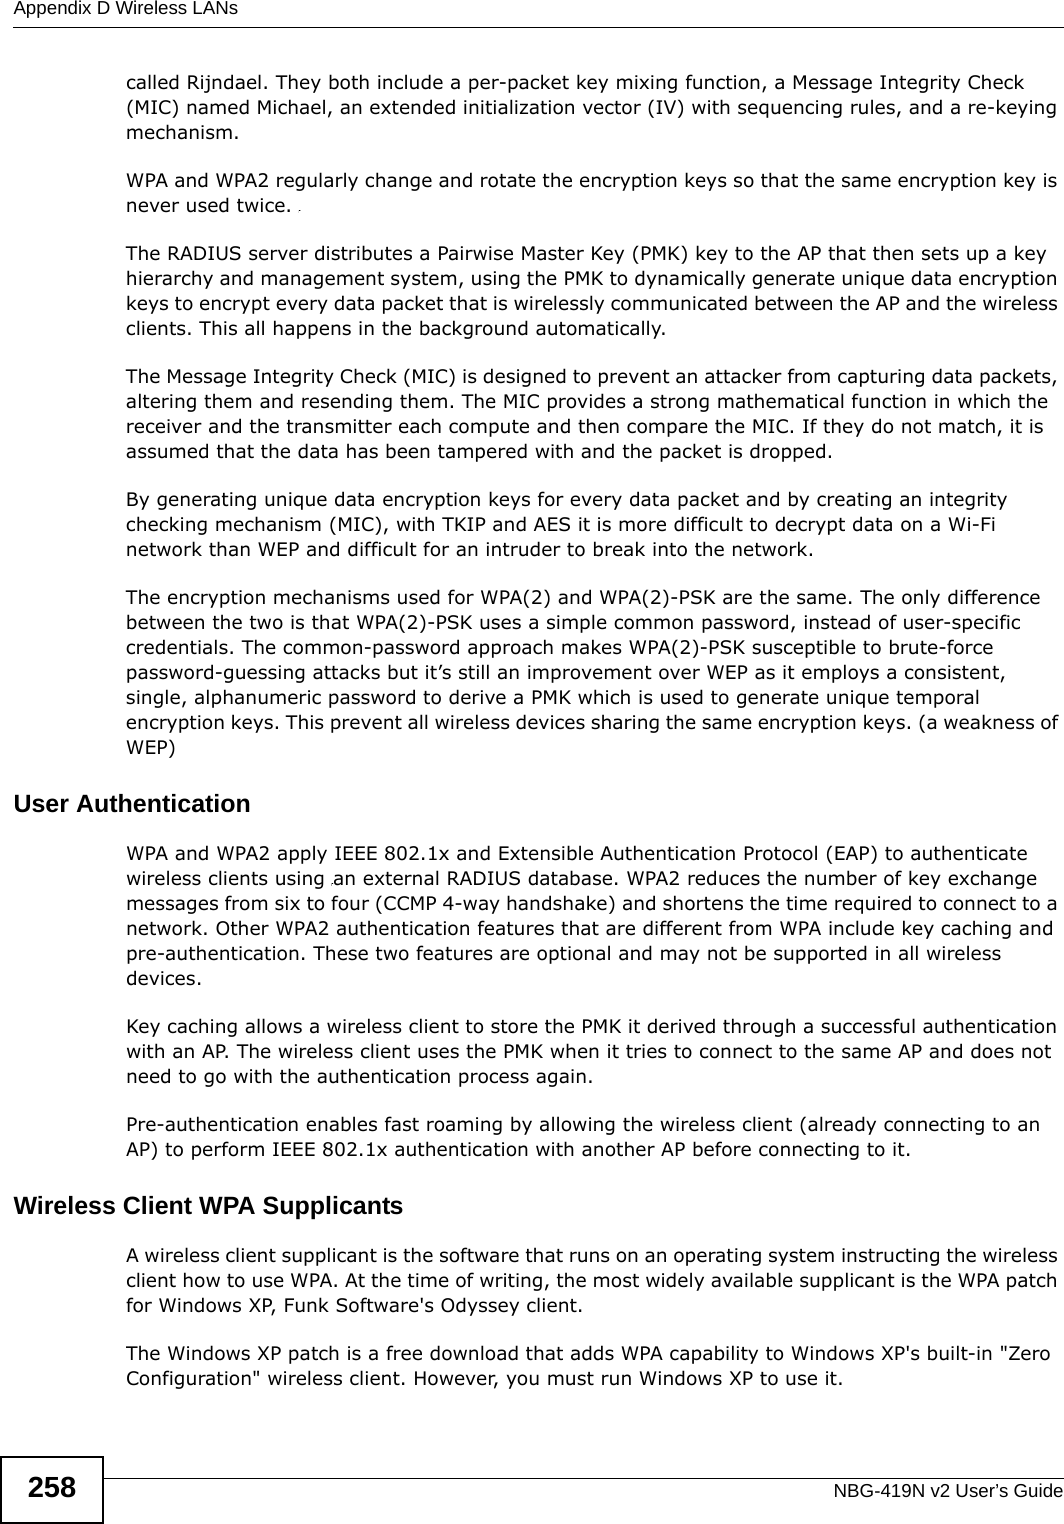 Appendix D Wireless LANsNBG-419N v2 User’s Guide258called Rijndael. They both include a per-packet key mixing function, a Message Integrity Check (MIC) named Michael, an extended initialization vector (IV) with sequencing rules, and a re-keying mechanism.WPA and WPA2 regularly change and rotate the encryption keys so that the same encryption key is never used twice. The RADIUS server distributes a Pairwise Master Key (PMK) key to the AP that then sets up a key hierarchy and management system, using the PMK to dynamically generate unique data encryption keys to encrypt every data packet that is wirelessly communicated between the AP and the wireless clients. This all happens in the background automatically.The Message Integrity Check (MIC) is designed to prevent an attacker from capturing data packets, altering them and resending them. The MIC provides a strong mathematical function in which the receiver and the transmitter each compute and then compare the MIC. If they do not match, it is assumed that the data has been tampered with and the packet is dropped. By generating unique data encryption keys for every data packet and by creating an integrity checking mechanism (MIC), with TKIP and AES it is more difficult to decrypt data on a Wi-Fi network than WEP and difficult for an intruder to break into the network. The encryption mechanisms used for WPA(2) and WPA(2)-PSK are the same. The only difference between the two is that WPA(2)-PSK uses a simple common password, instead of user-specific credentials. The common-password approach makes WPA(2)-PSK susceptible to brute-force password-guessing attacks but it’s still an improvement over WEP as it employs a consistent, single, alphanumeric password to derive a PMK which is used to generate unique temporal encryption keys. This prevent all wireless devices sharing the same encryption keys. (a weakness of WEP)User Authentication WPA and WPA2 apply IEEE 802.1x and Extensible Authentication Protocol (EAP) to authenticate wireless clients using an external RADIUS database. WPA2 reduces the number of key exchange messages from six to four (CCMP 4-way handshake) and shortens the time required to connect to a network. Other WPA2 authentication features that are different from WPA include key caching and pre-authentication. These two features are optional and may not be supported in all wireless devices.Key caching allows a wireless client to store the PMK it derived through a successful authentication with an AP. The wireless client uses the PMK when it tries to connect to the same AP and does not need to go with the authentication process again.Pre-authentication enables fast roaming by allowing the wireless client (already connecting to an AP) to perform IEEE 802.1x authentication with another AP before connecting to it.Wireless Client WPA SupplicantsA wireless client supplicant is the software that runs on an operating system instructing the wireless client how to use WPA. At the time of writing, the most widely available supplicant is the WPA patch for Windows XP, Funk Software&apos;s Odyssey client. The Windows XP patch is a free download that adds WPA capability to Windows XP&apos;s built-in &quot;Zero Configuration&quot; wireless client. However, you must run Windows XP to use it. 